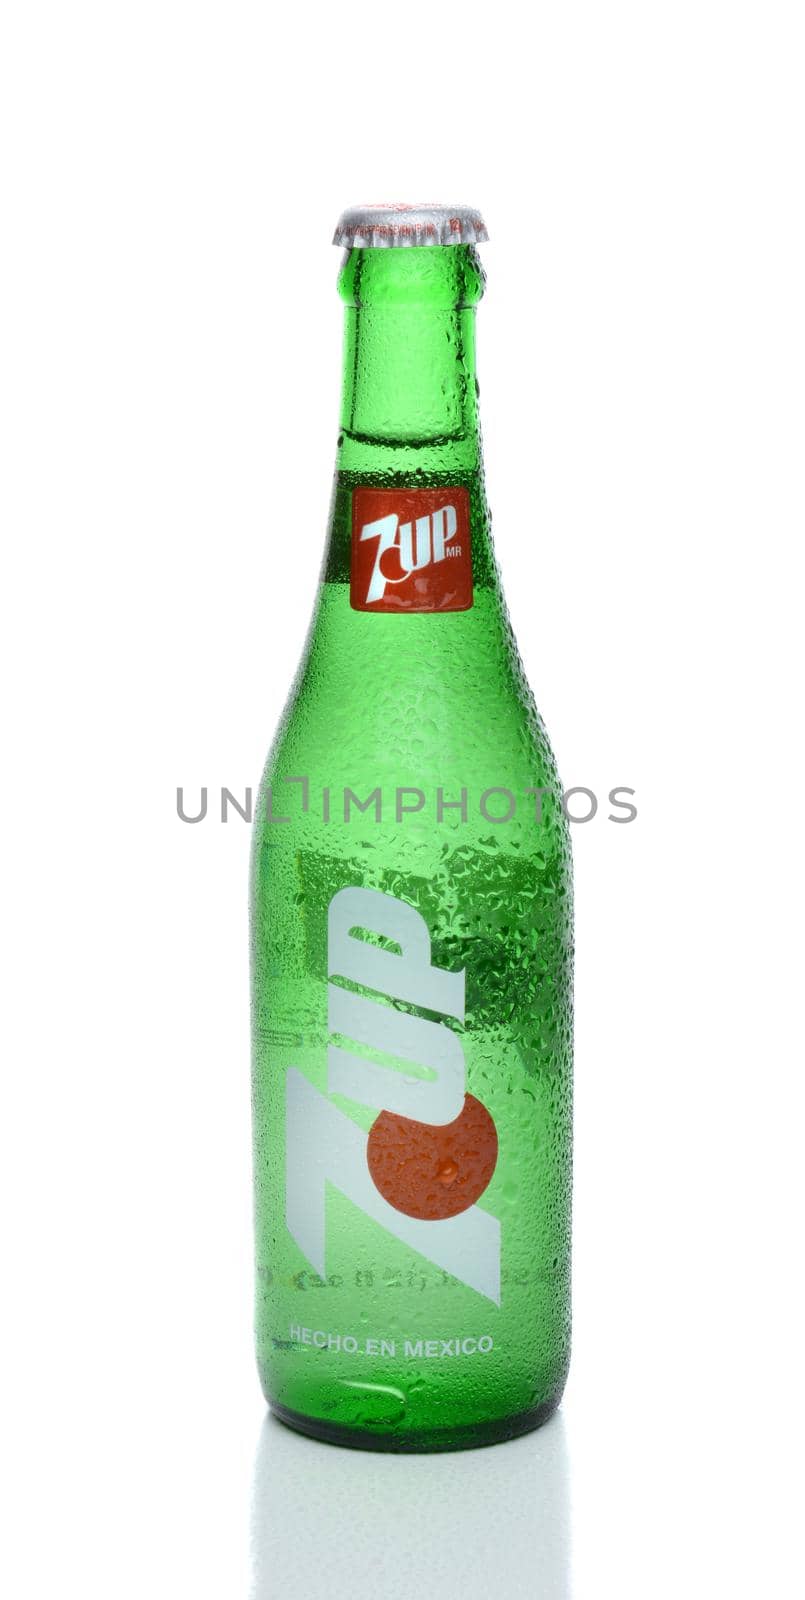 IRVINE, CA - FEBRUARY 19, 2015: A glass 7-Up bottle. A lemon-lime flavored, non-caffeinated soft drink. The rights to the brand are held by Dr Pepper Snapple Group in the USA, and PepsiCo elsewhere. 